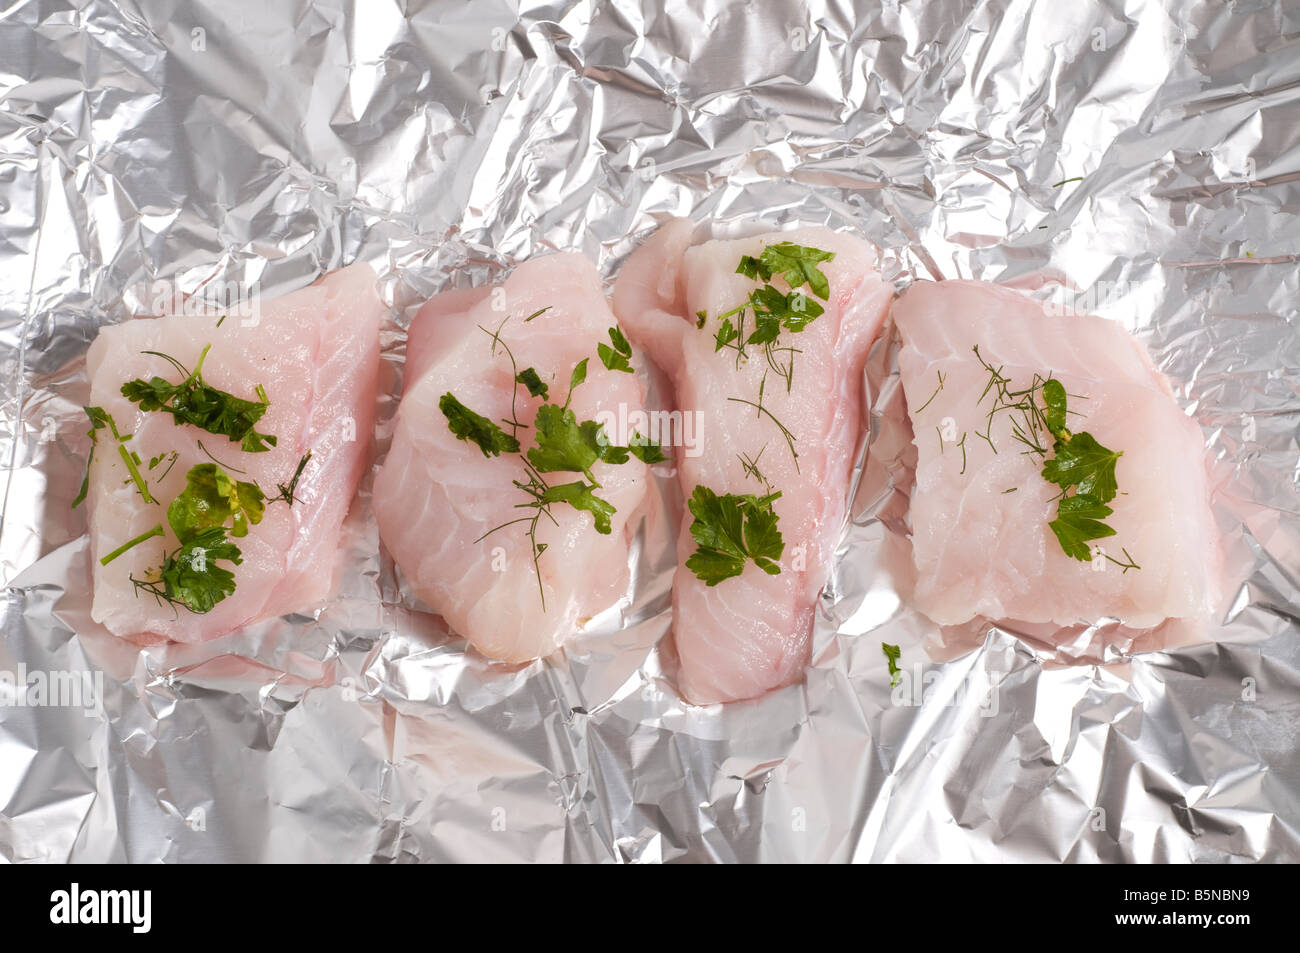 sliced monk fish and herbs laying on a sheet of tin foil Stock Photo